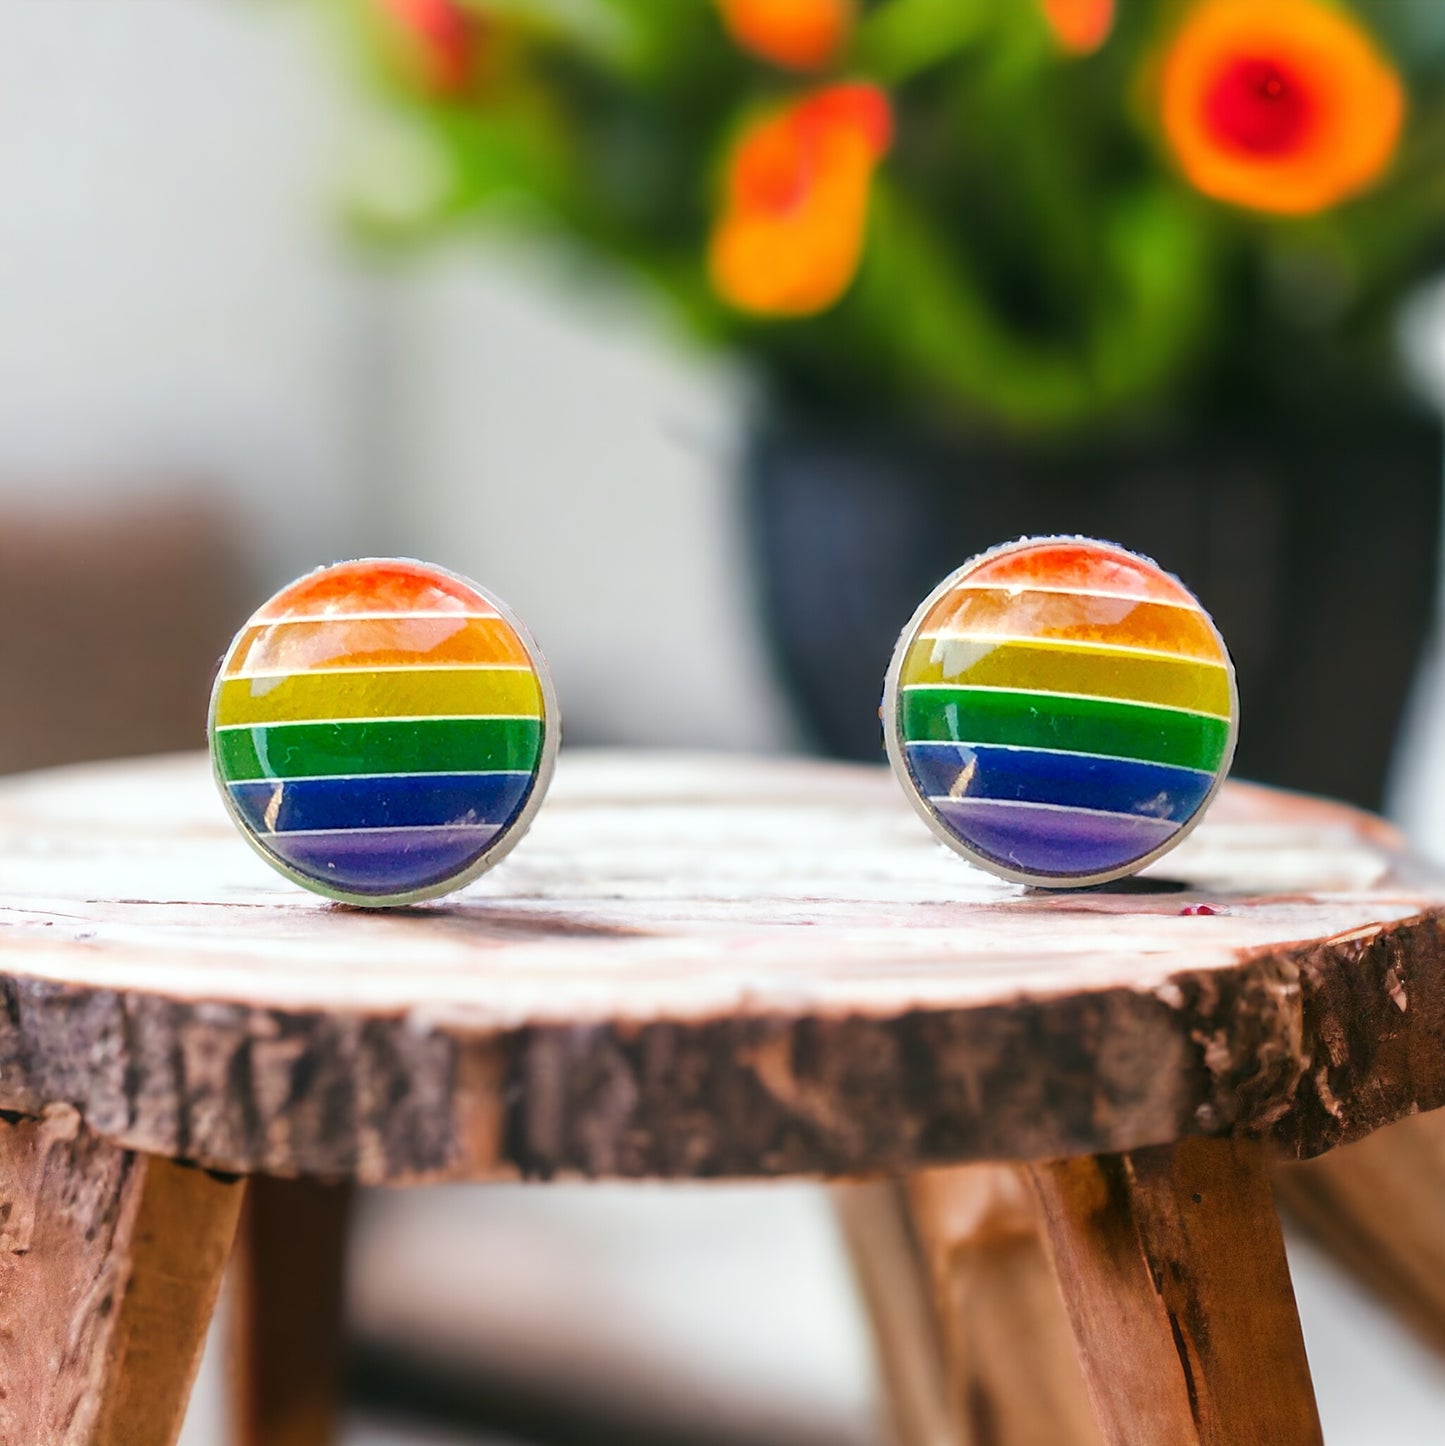 Rainbow Striped Silver Stud Earrings: Colorful & Chic Accessories for Every Day